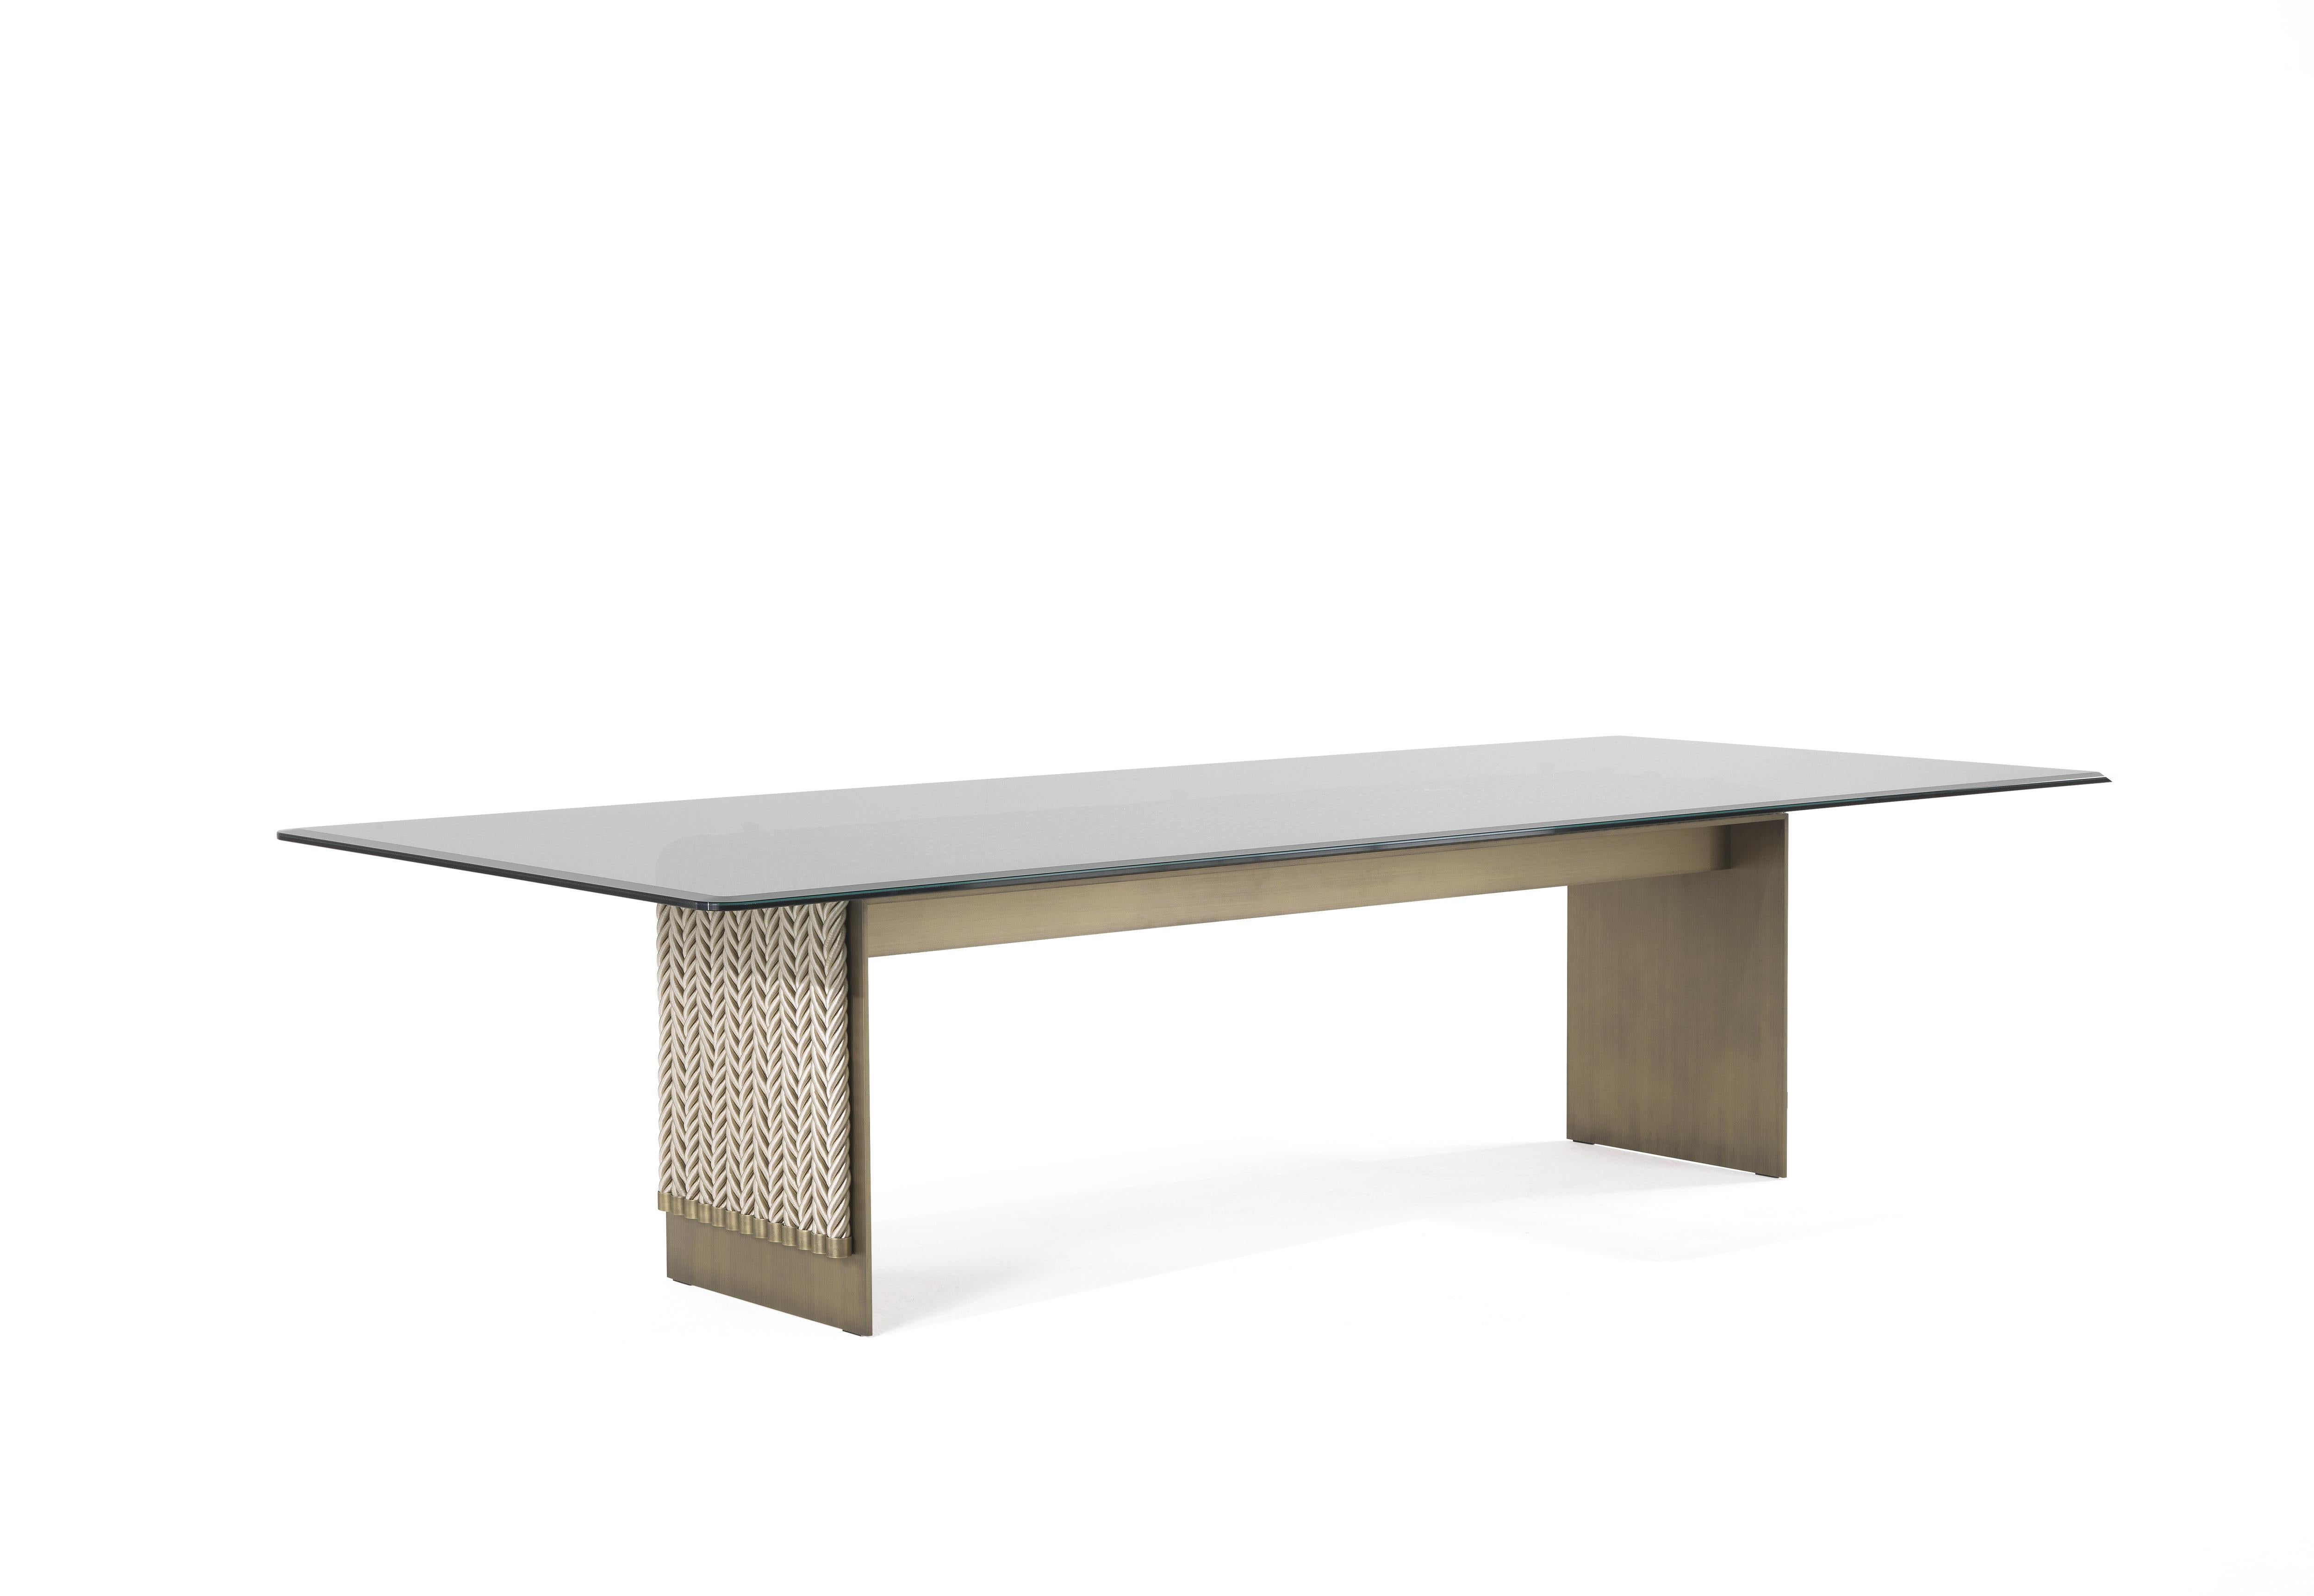 Evolution of the Glasgow line presented at the Salone del Mobile 2018, the dining table combines the linearity of the design with the complexity of the workmanship. Enriched with decorative strings, it presents a top in coupled glass bronzed glass